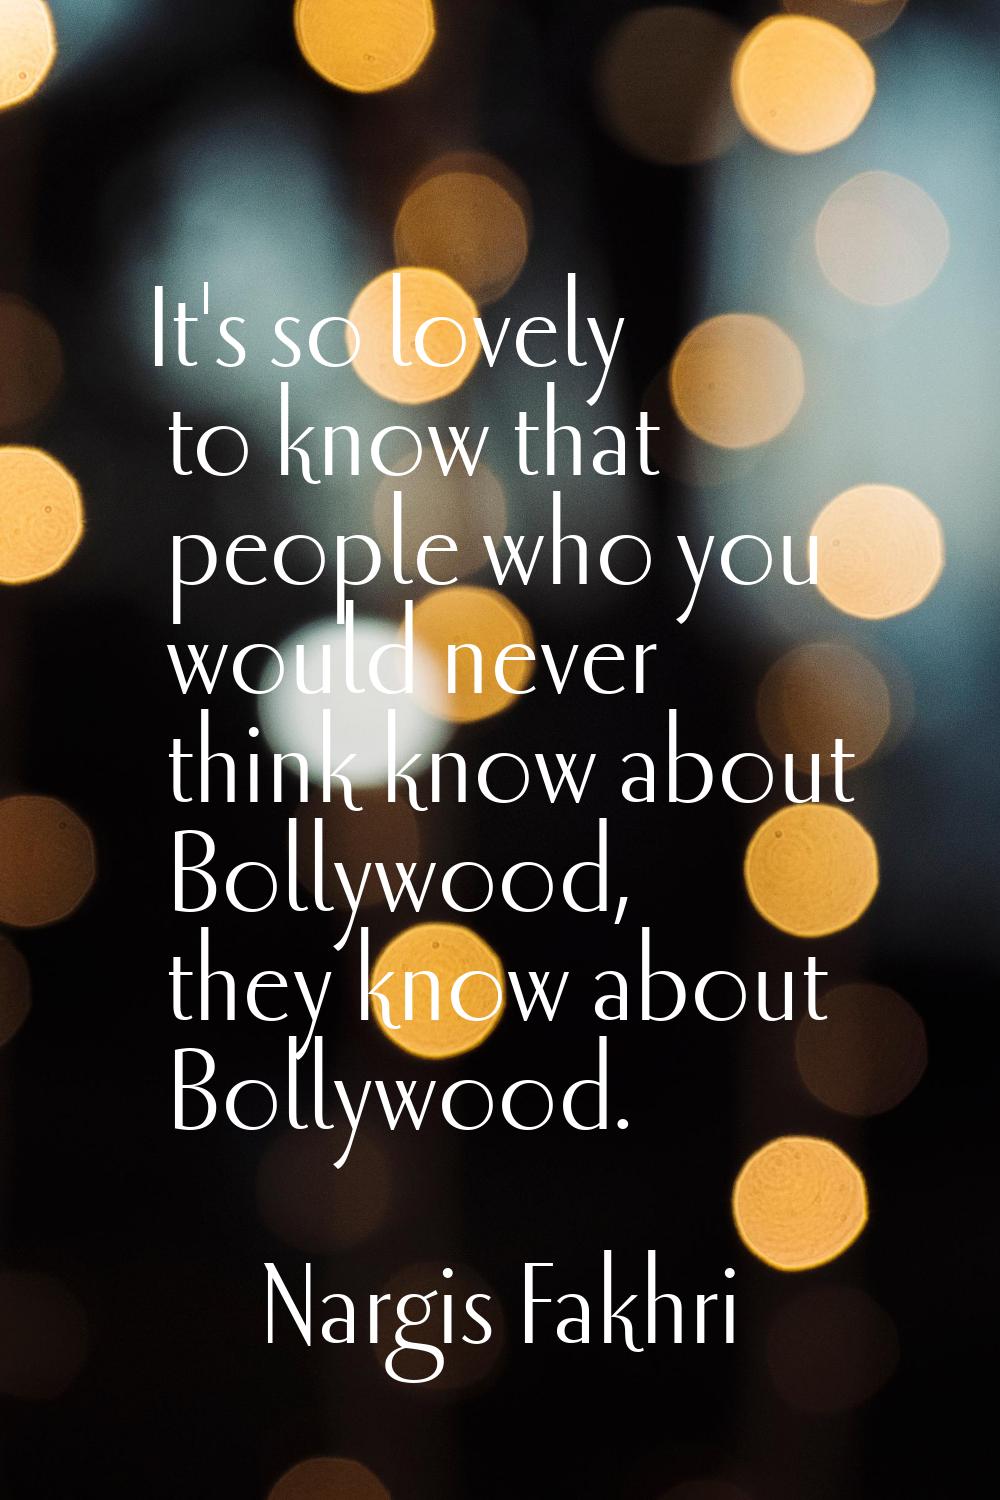 It's so lovely to know that people who you would never think know about Bollywood, they know about 